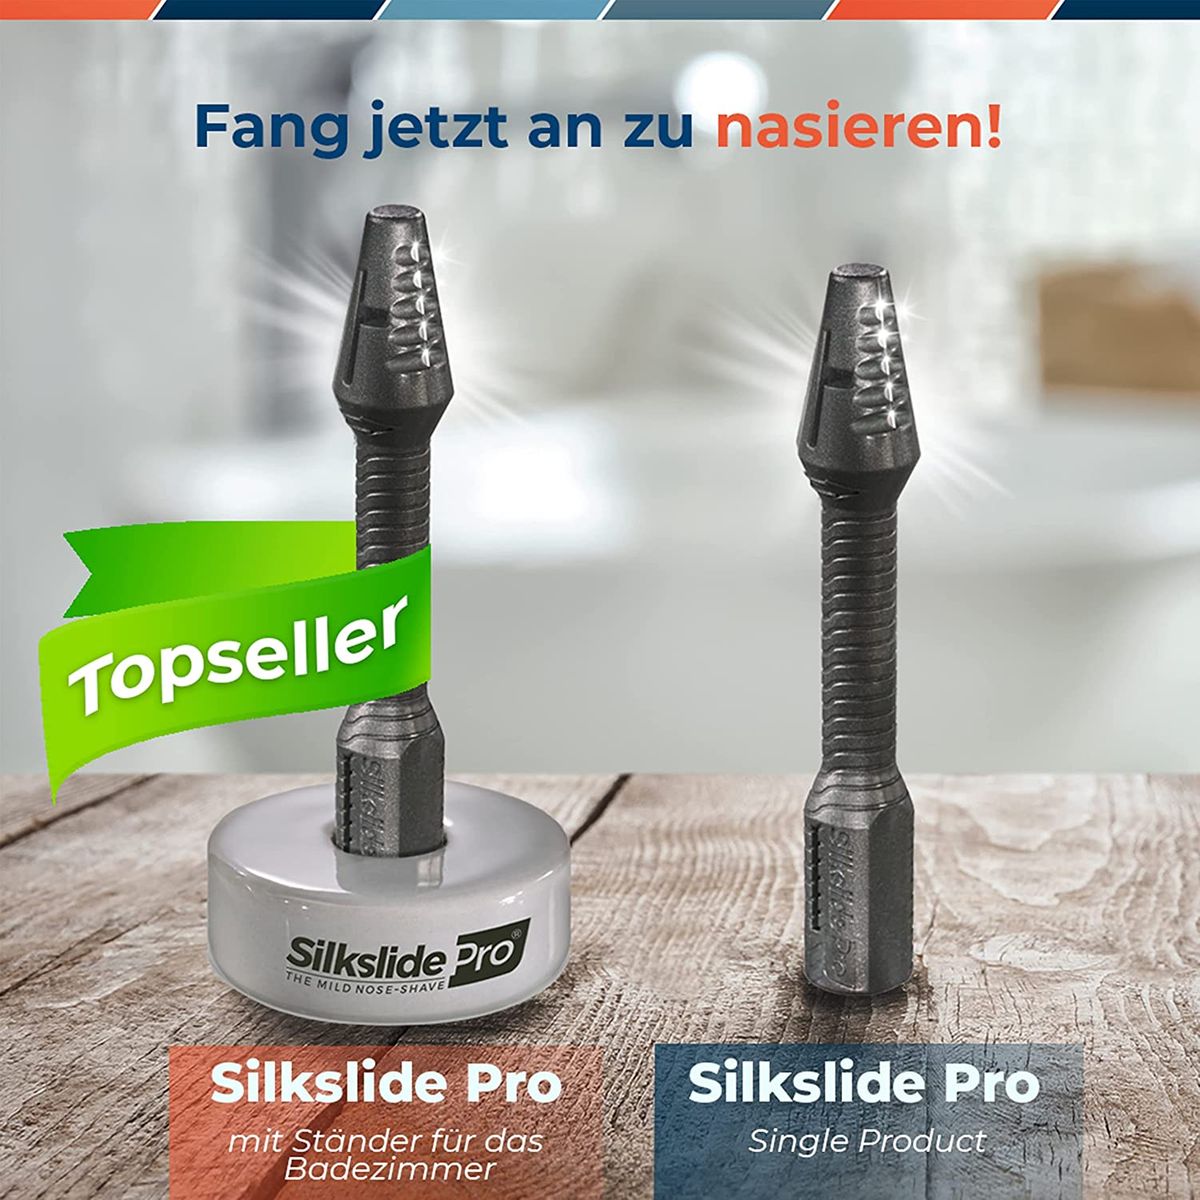 Silkslide Pro Nose Hair Trimmer Men Innovative professional & painless nose hair trimmer for the best nose shave